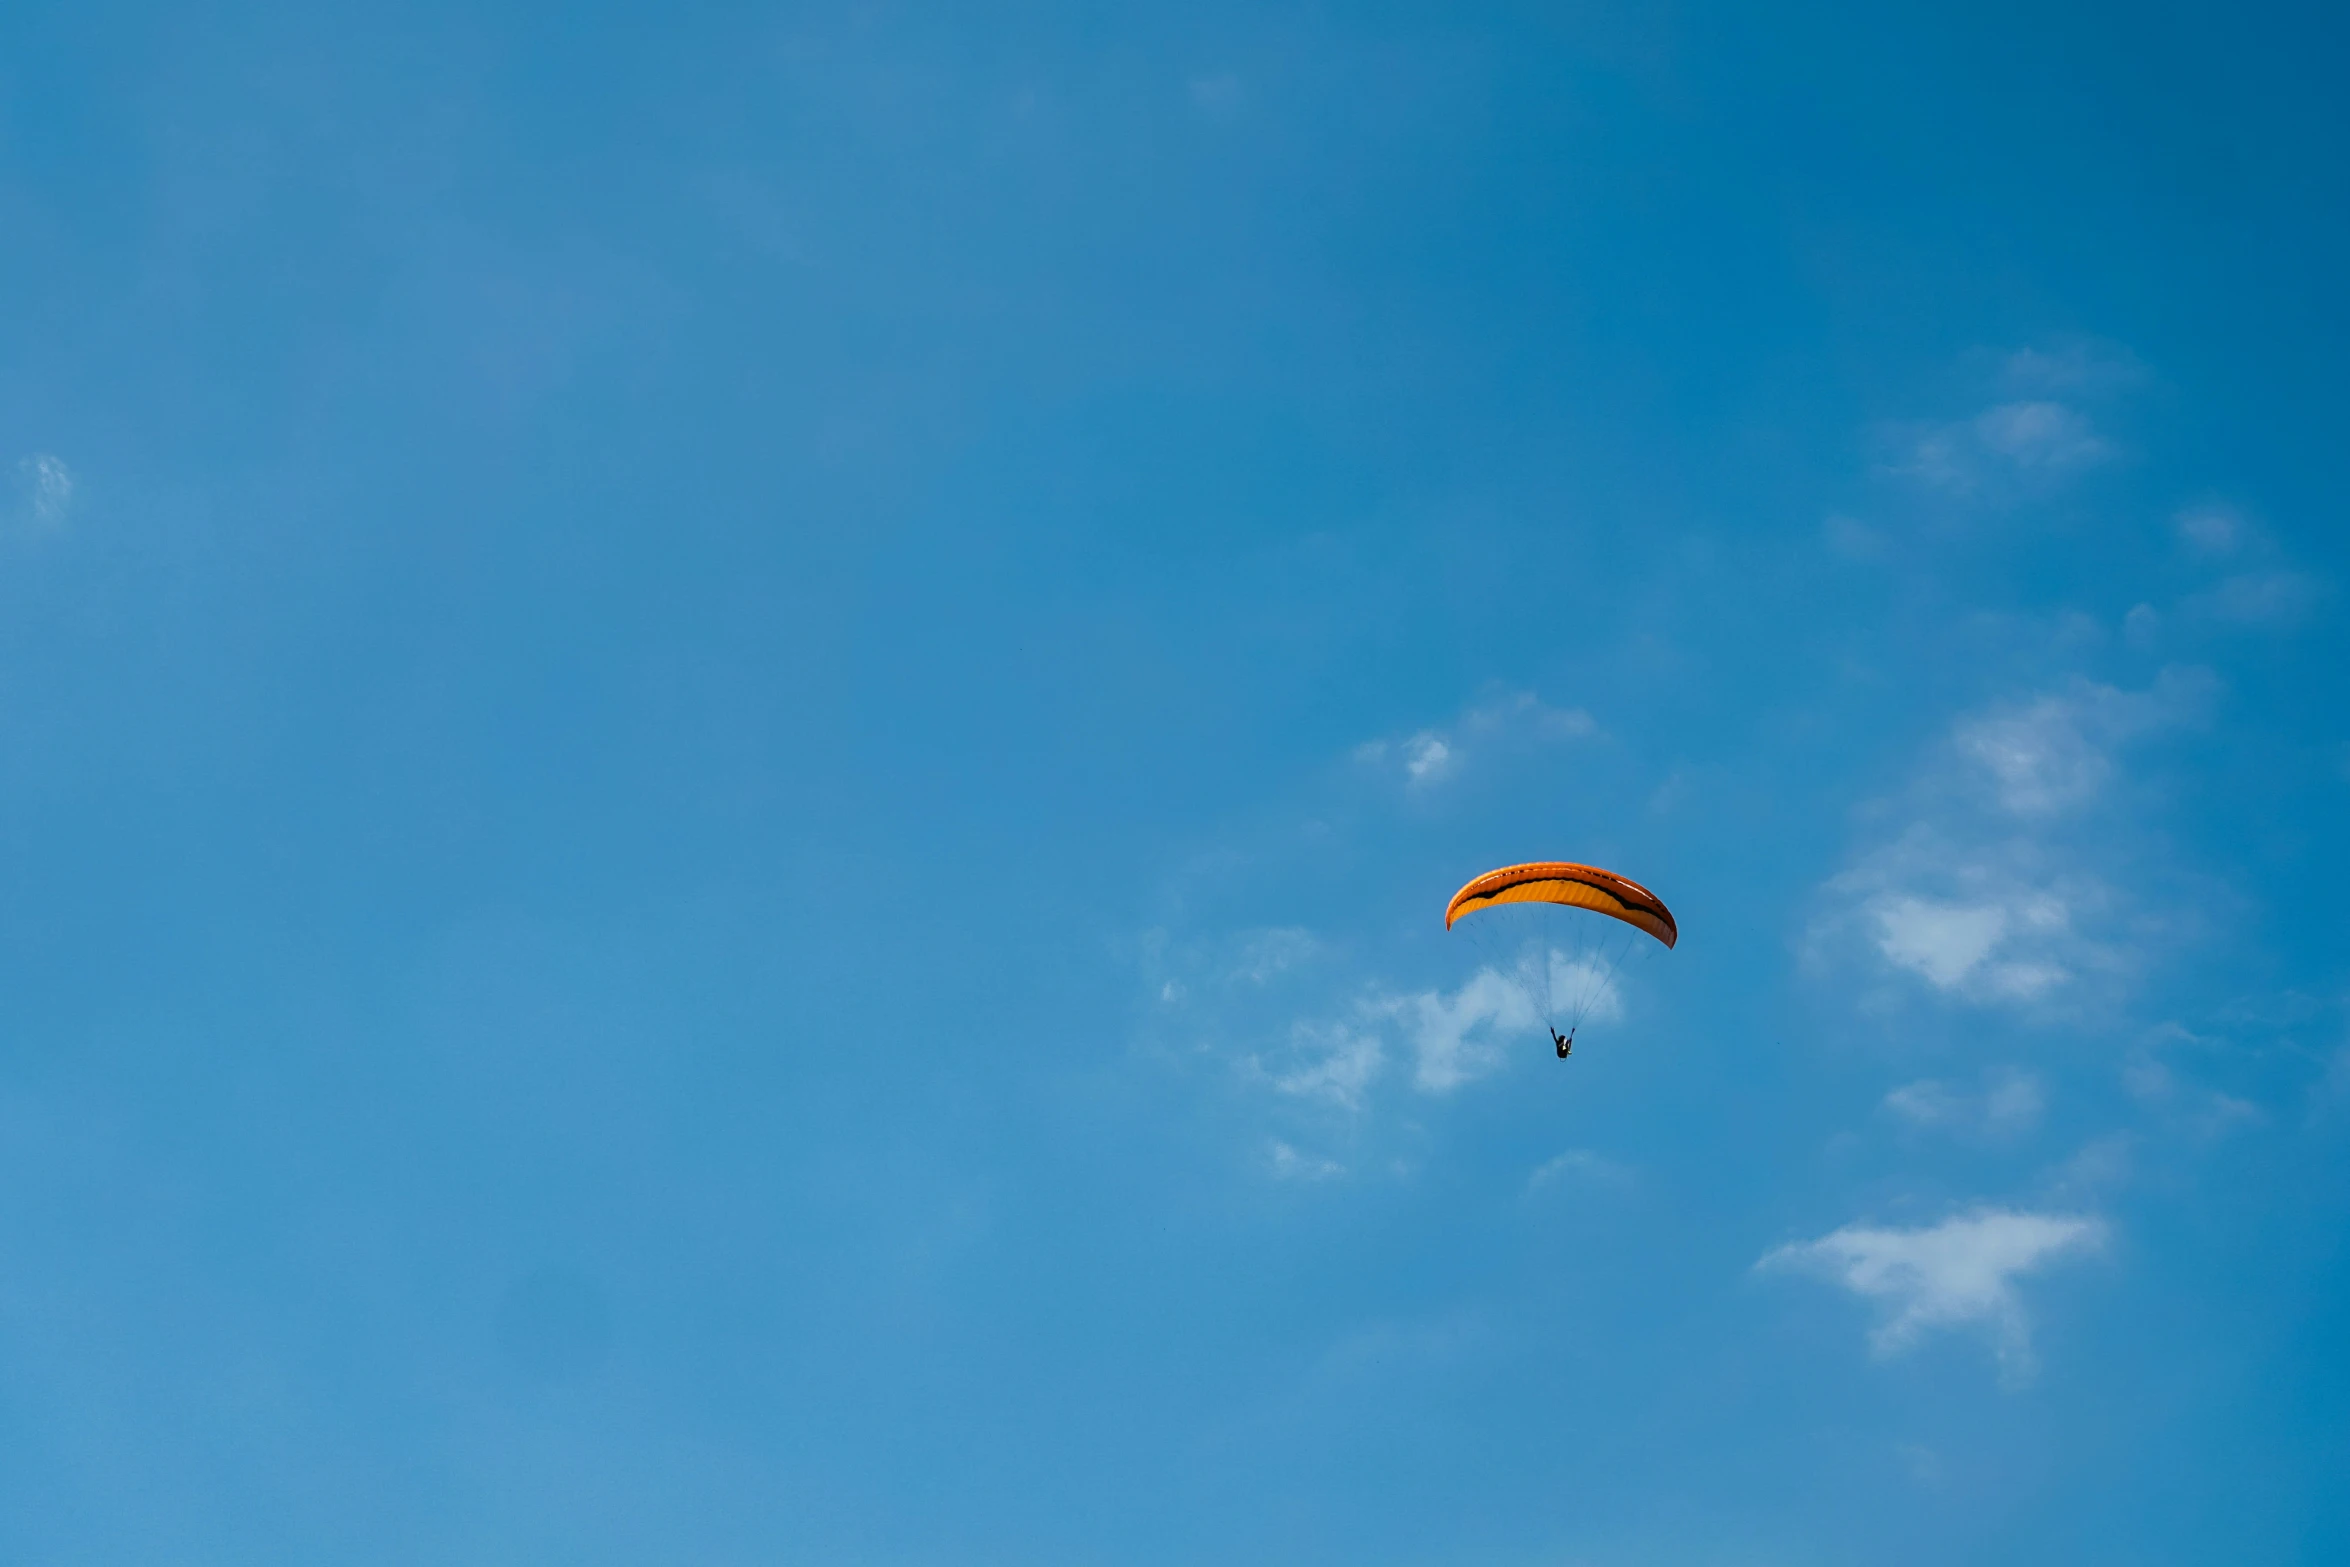 two kites fly through the blue sky in a cloudless day